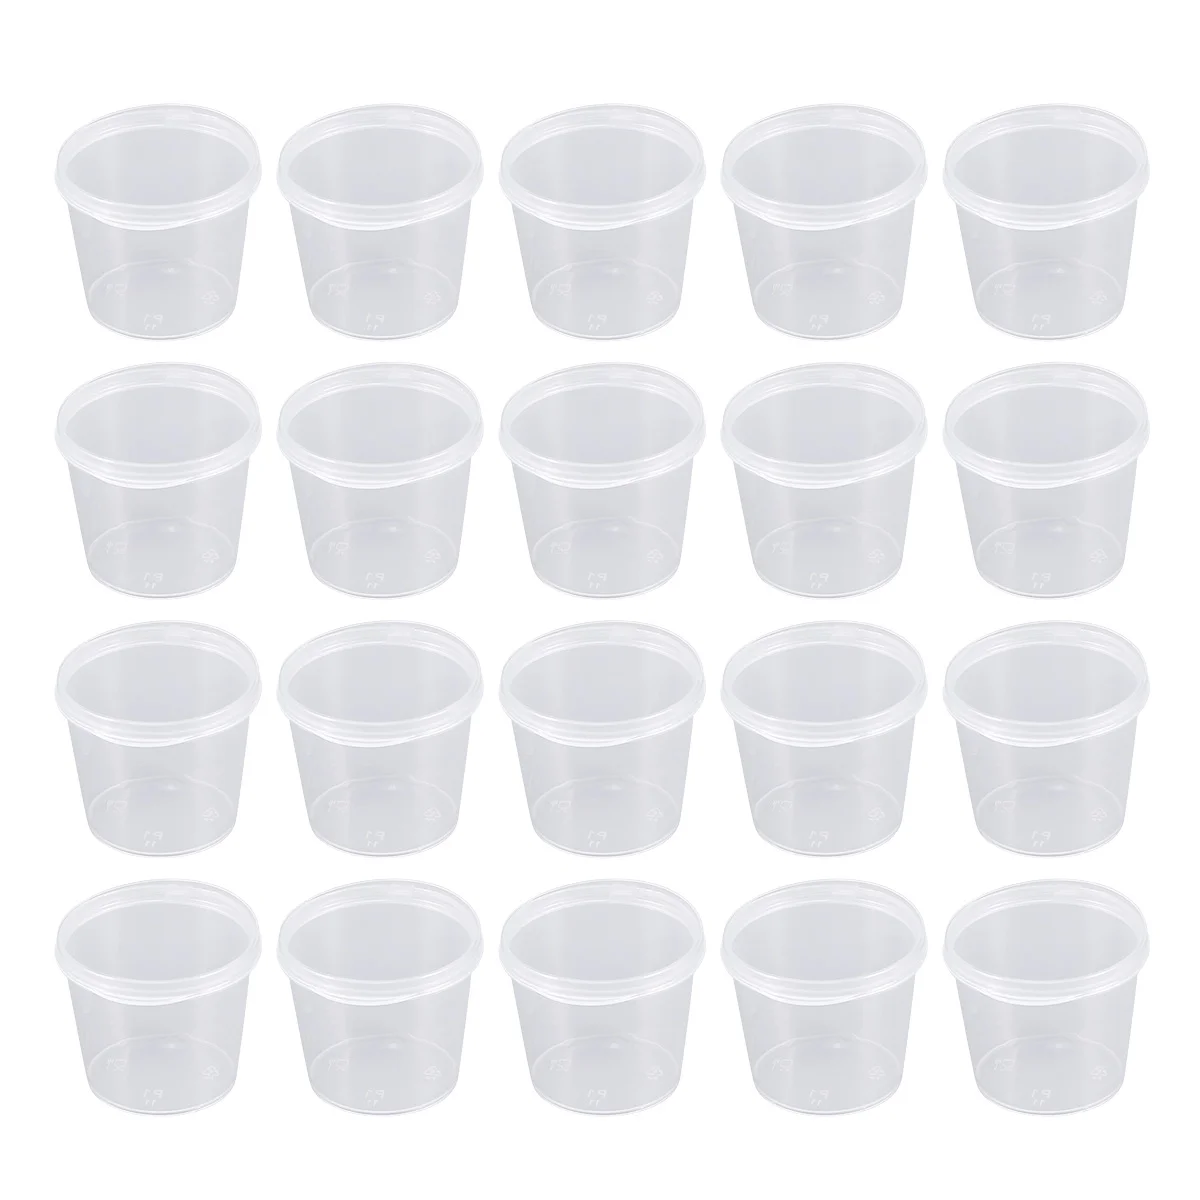 

Lids Cups 1 Oz Dressing Salad Containers Portion Sauce Containersample Condiment Shot Jelly